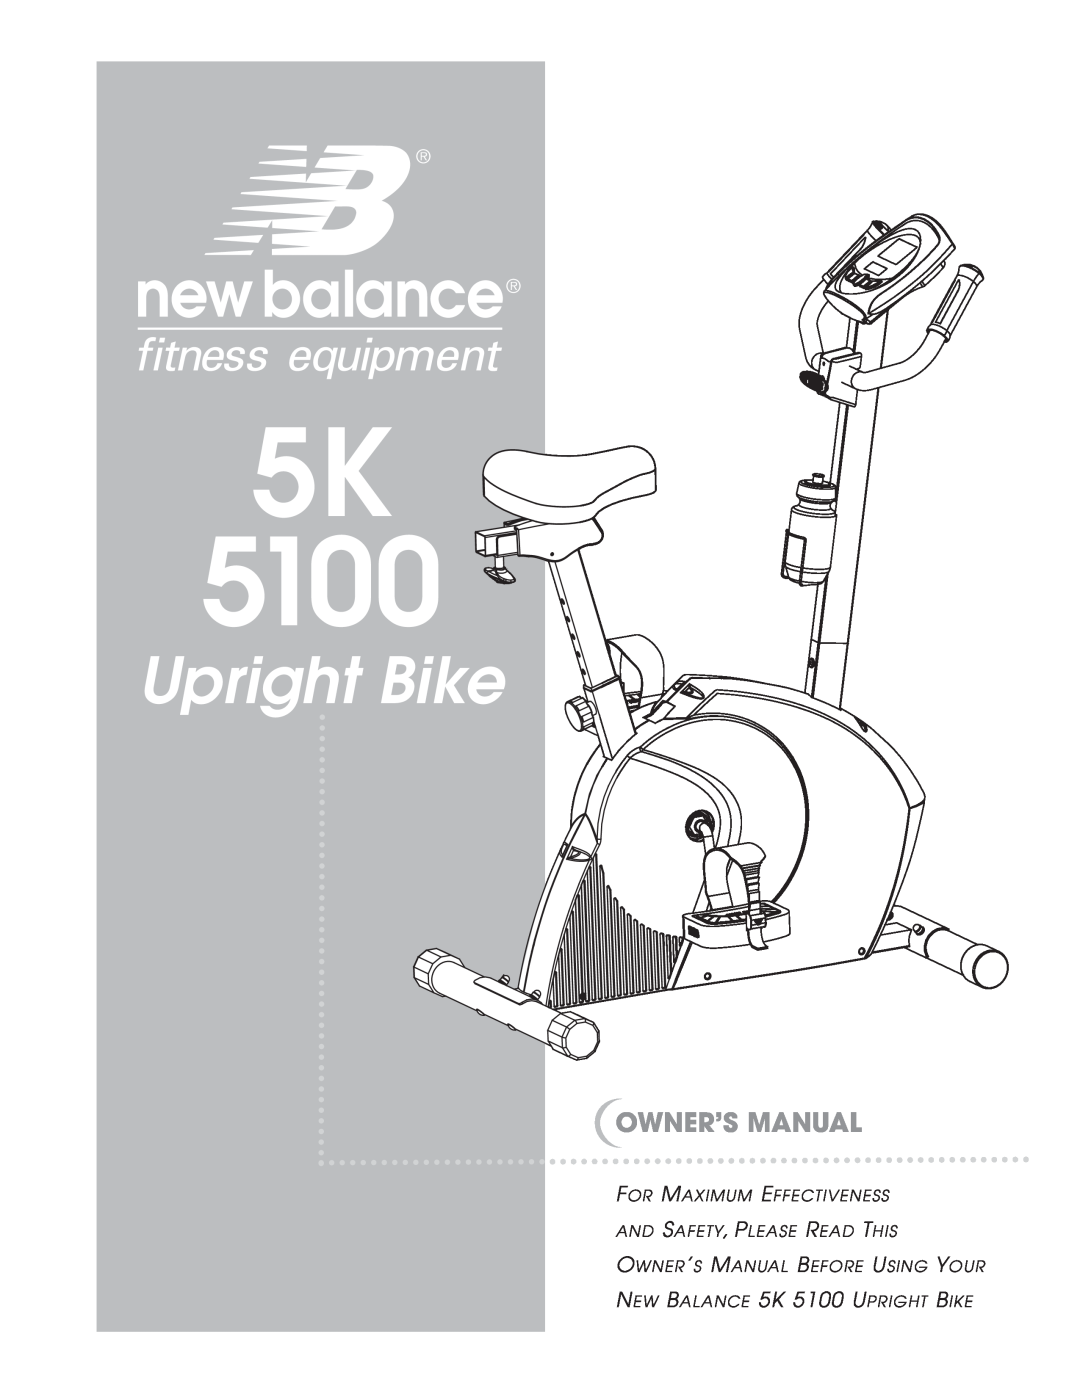 New Balance 5K 5100 owner manual Upright Bike, Owner’S Manual, For Maximum Effectiveness And Safety, Please Read This 